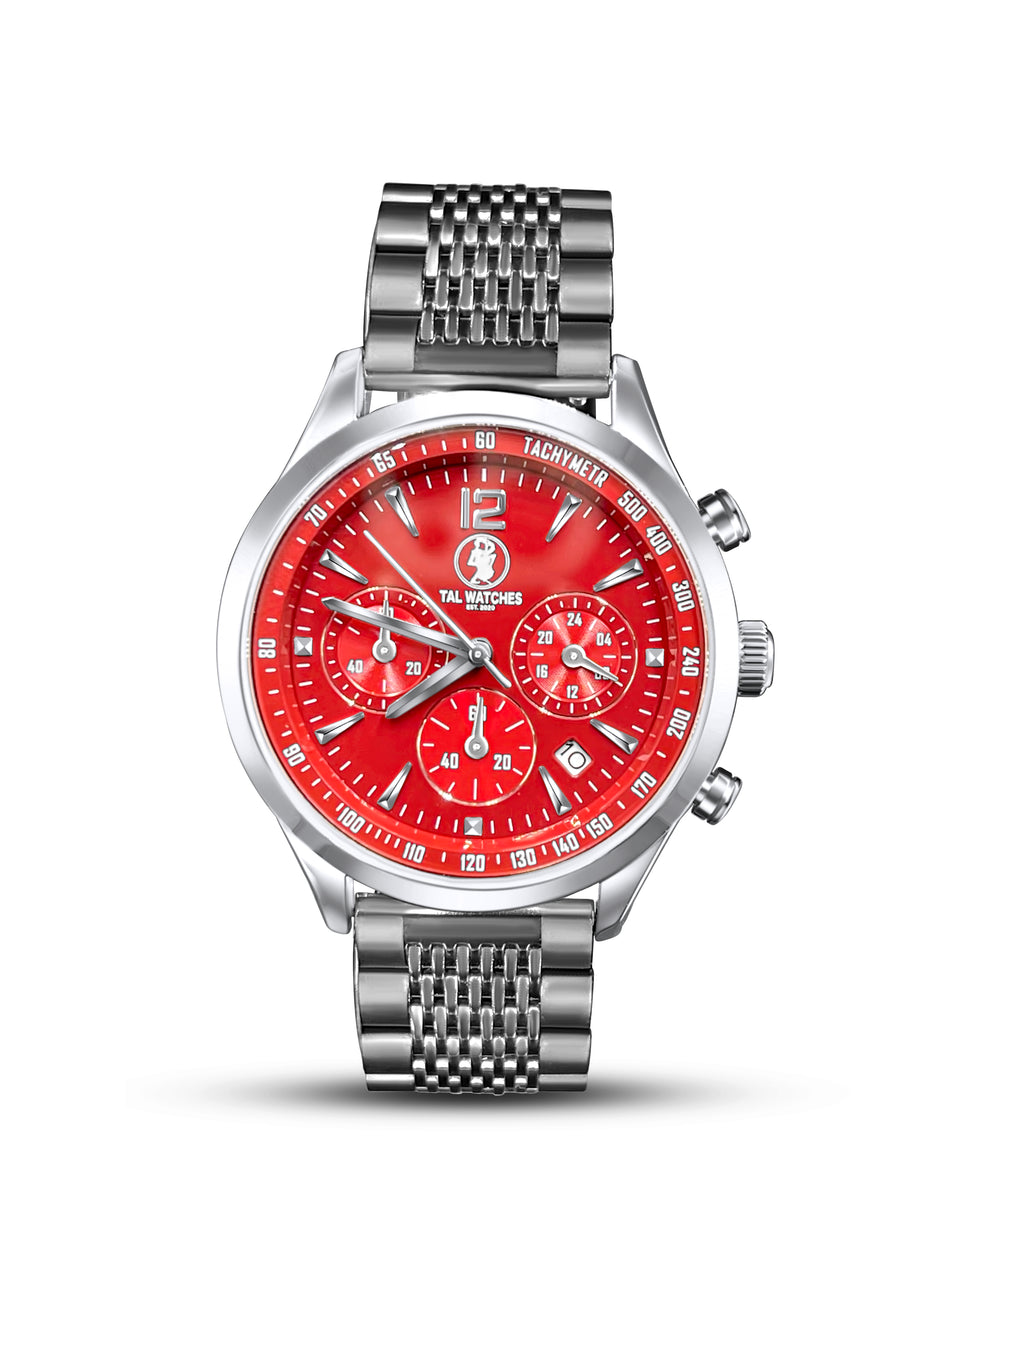 Black Stainless Steel - Chronograph Sapphire Bassy in Red - TAL WATCHES